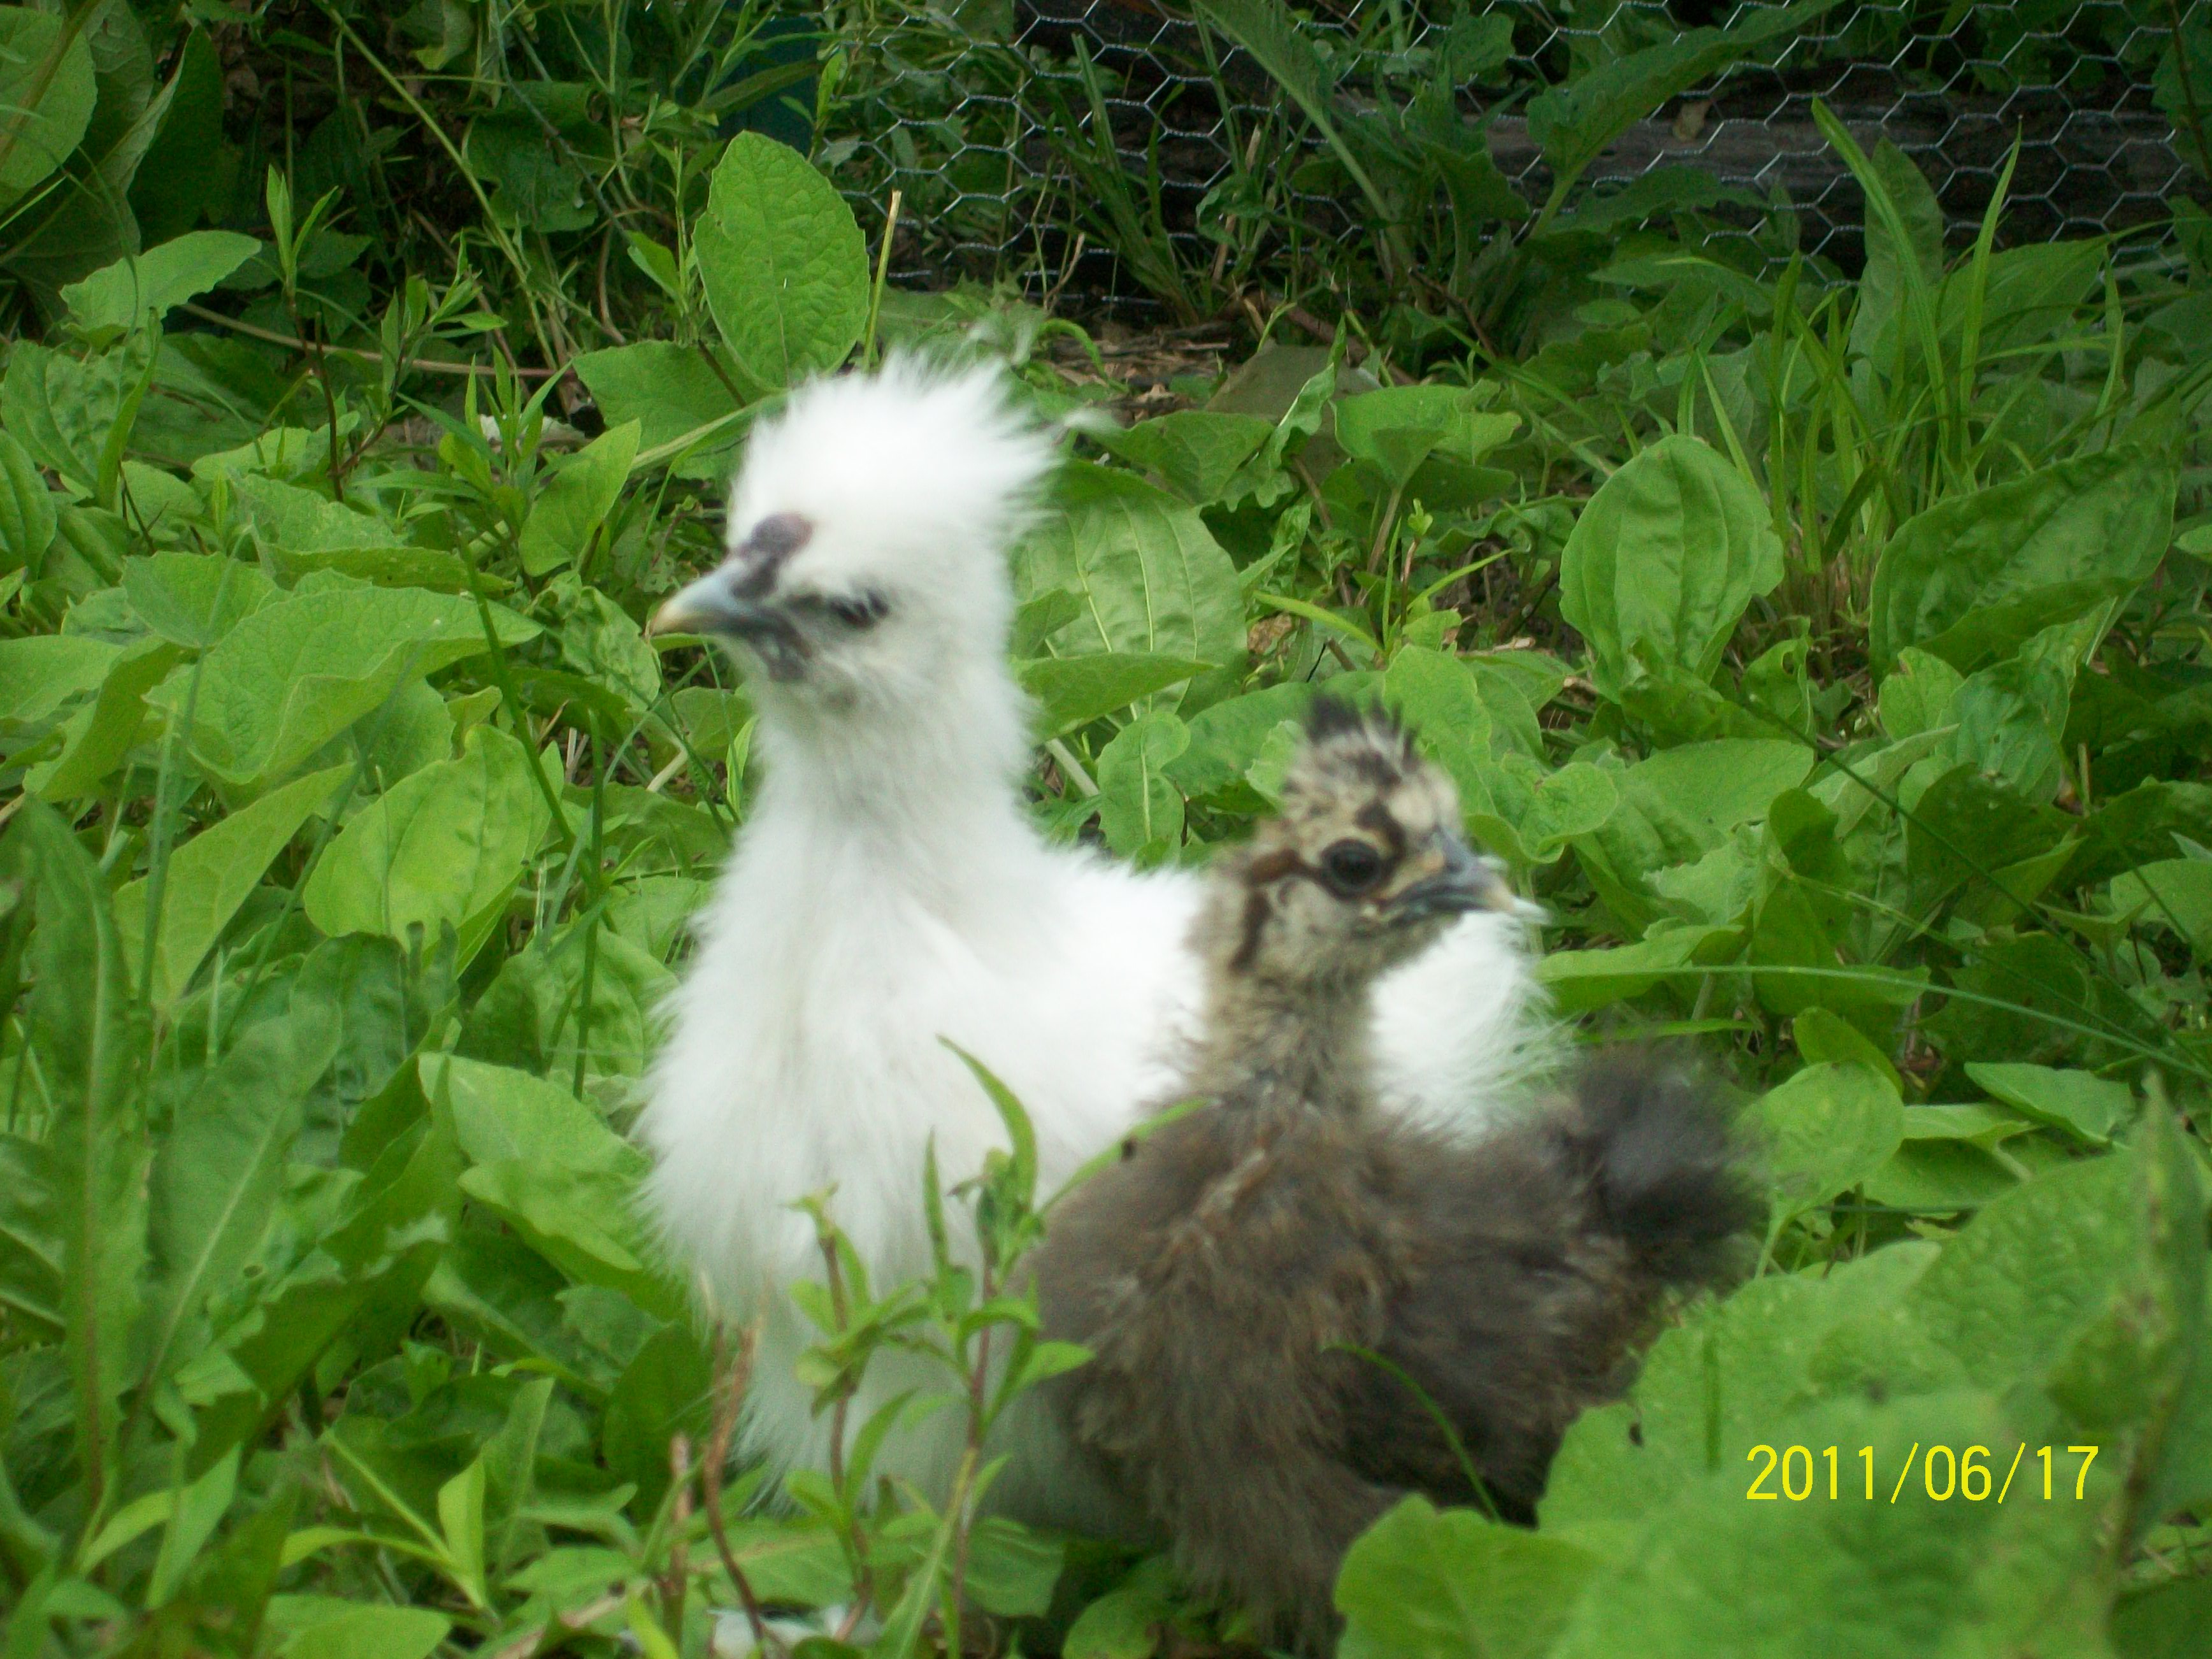 My silkies - Sweety (Partidge) and Angle (white)